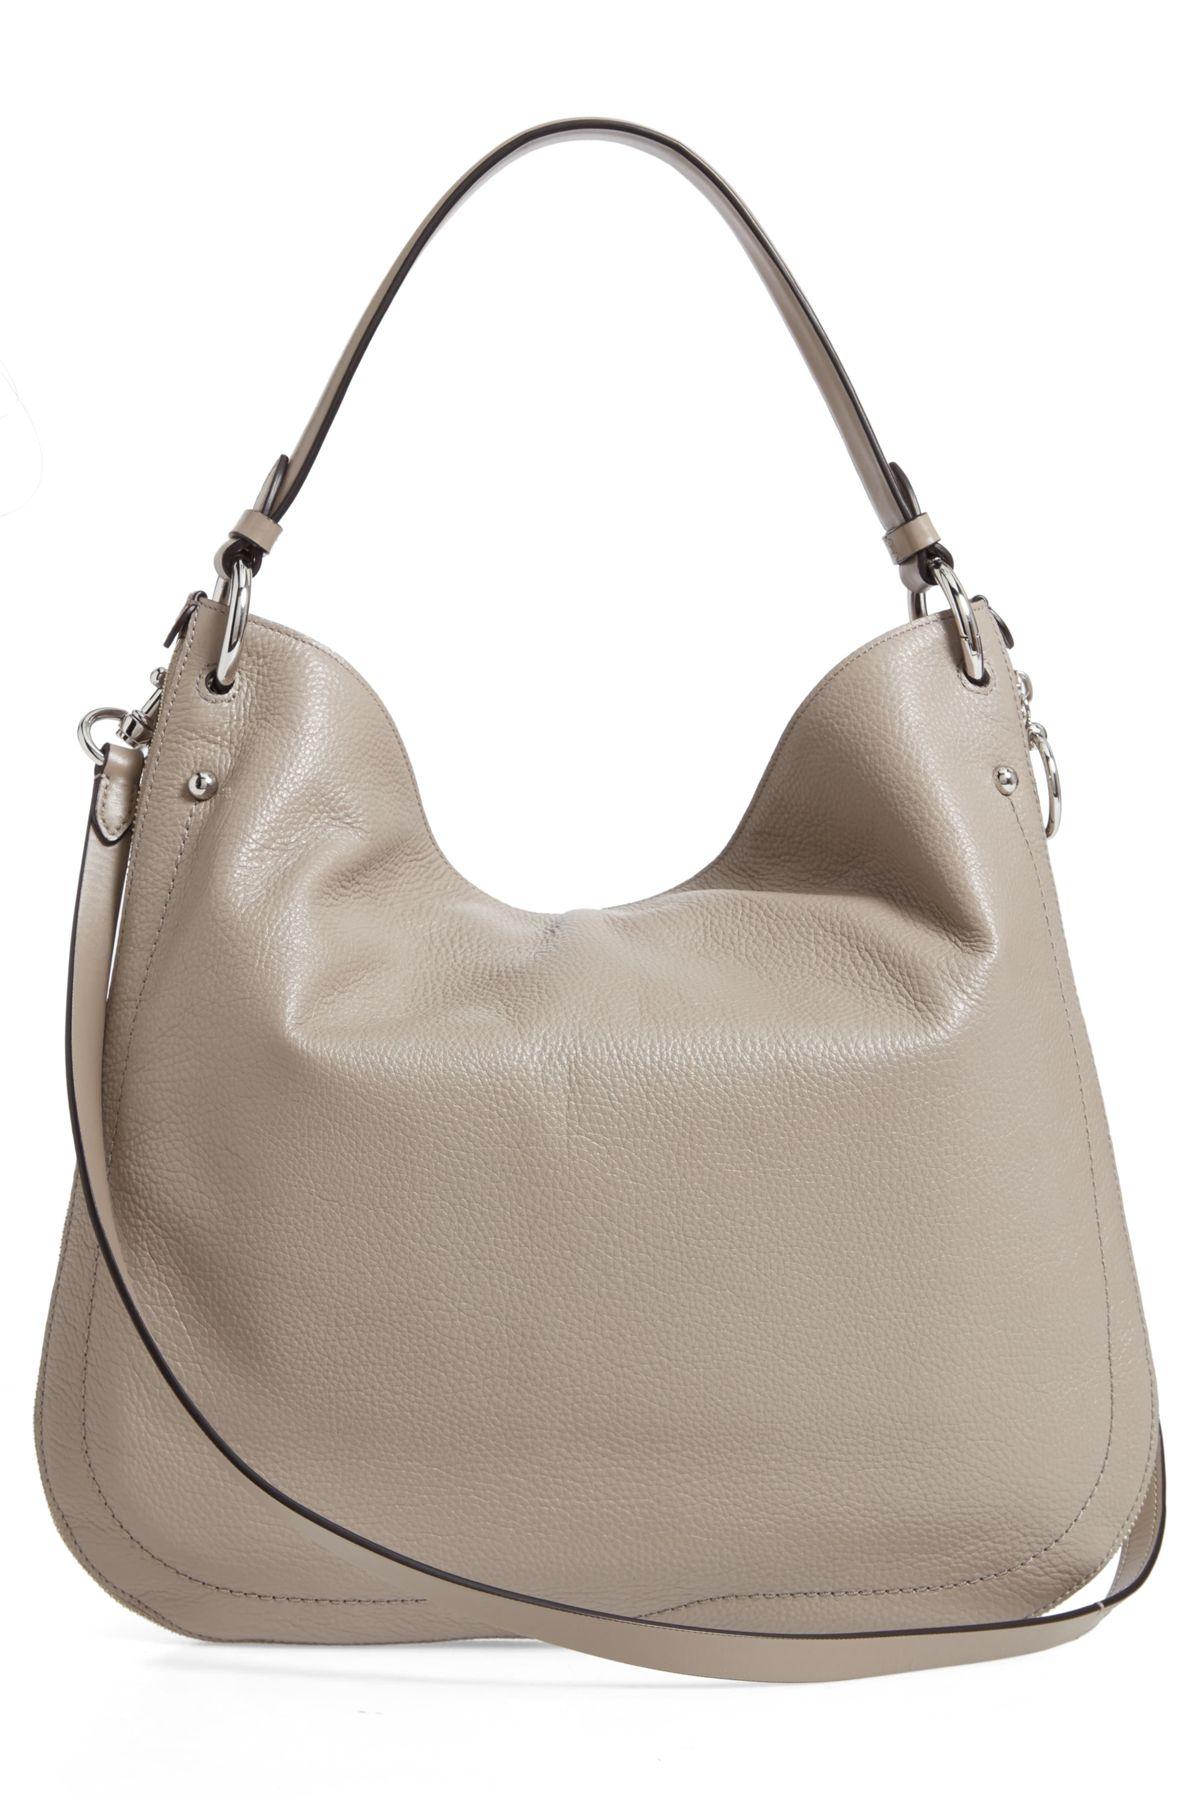 Rebecca Minkoff Jody Convertible Leather Hobo Bag in Taupe (Brown) - Lyst